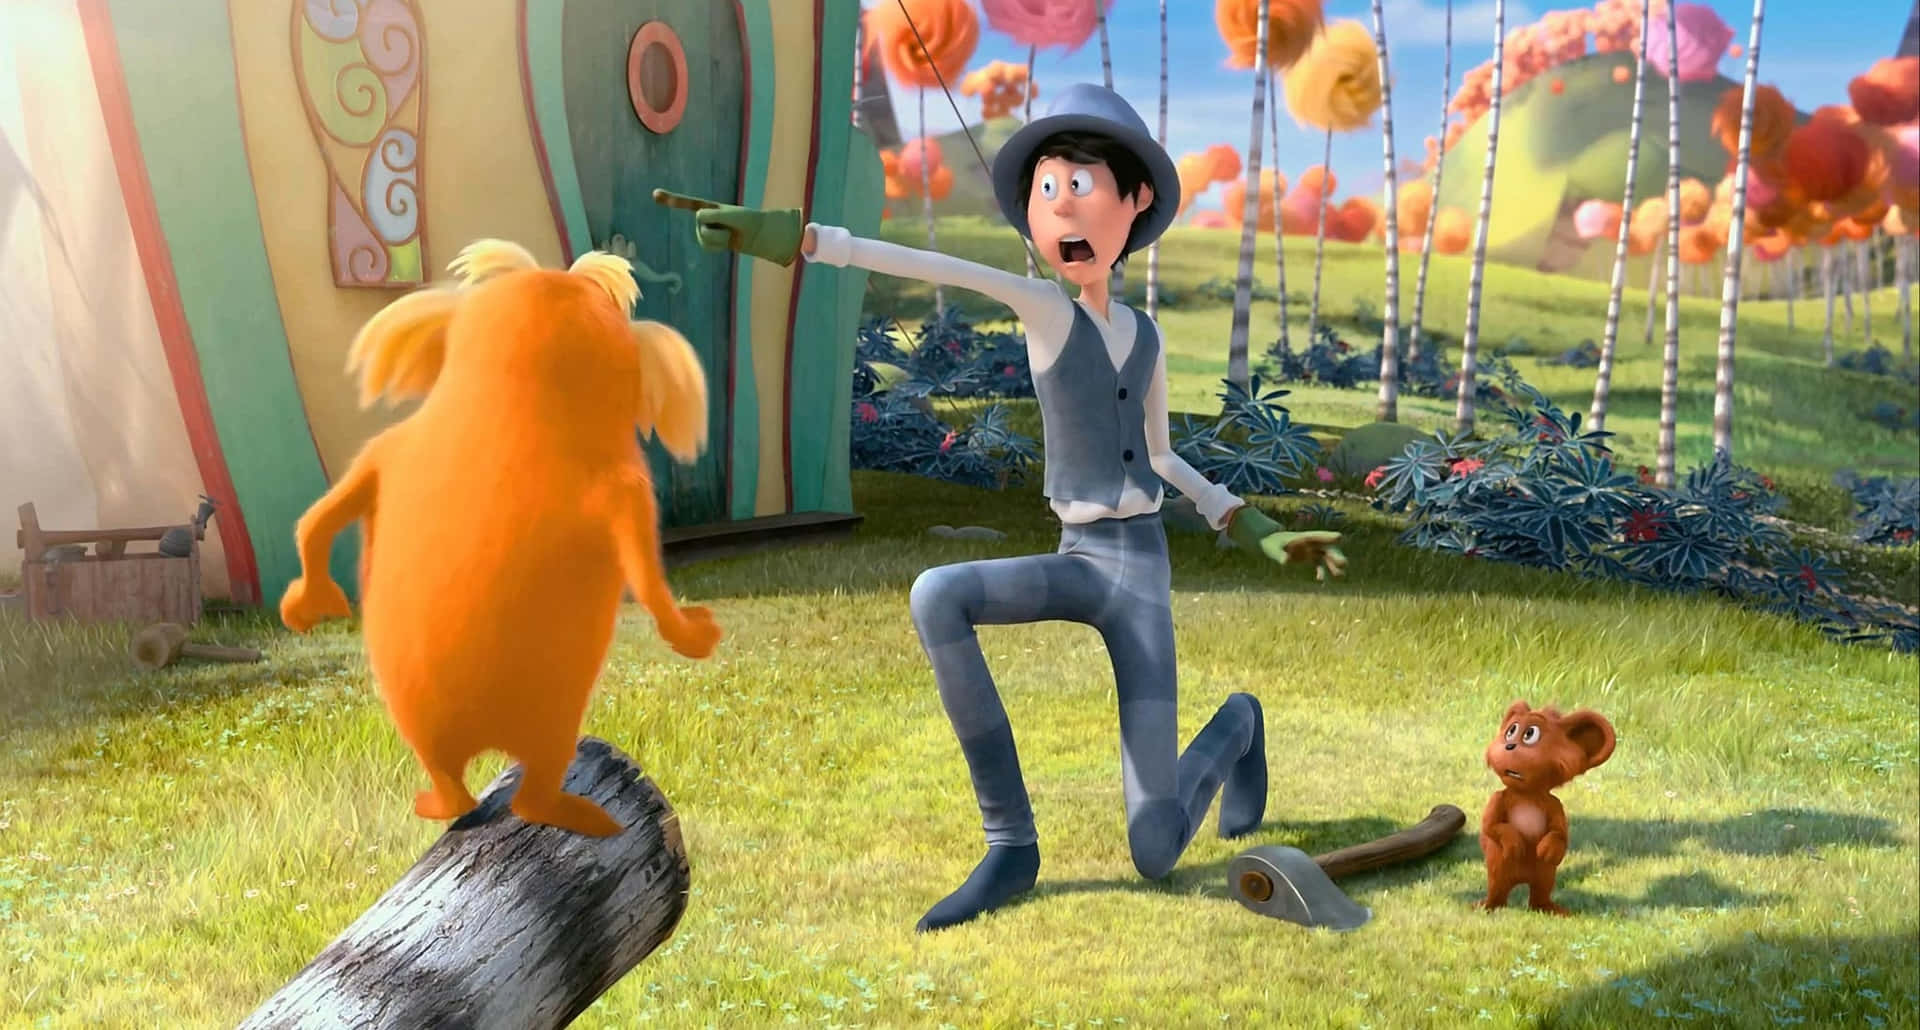 Lorax Character Confrontation Background